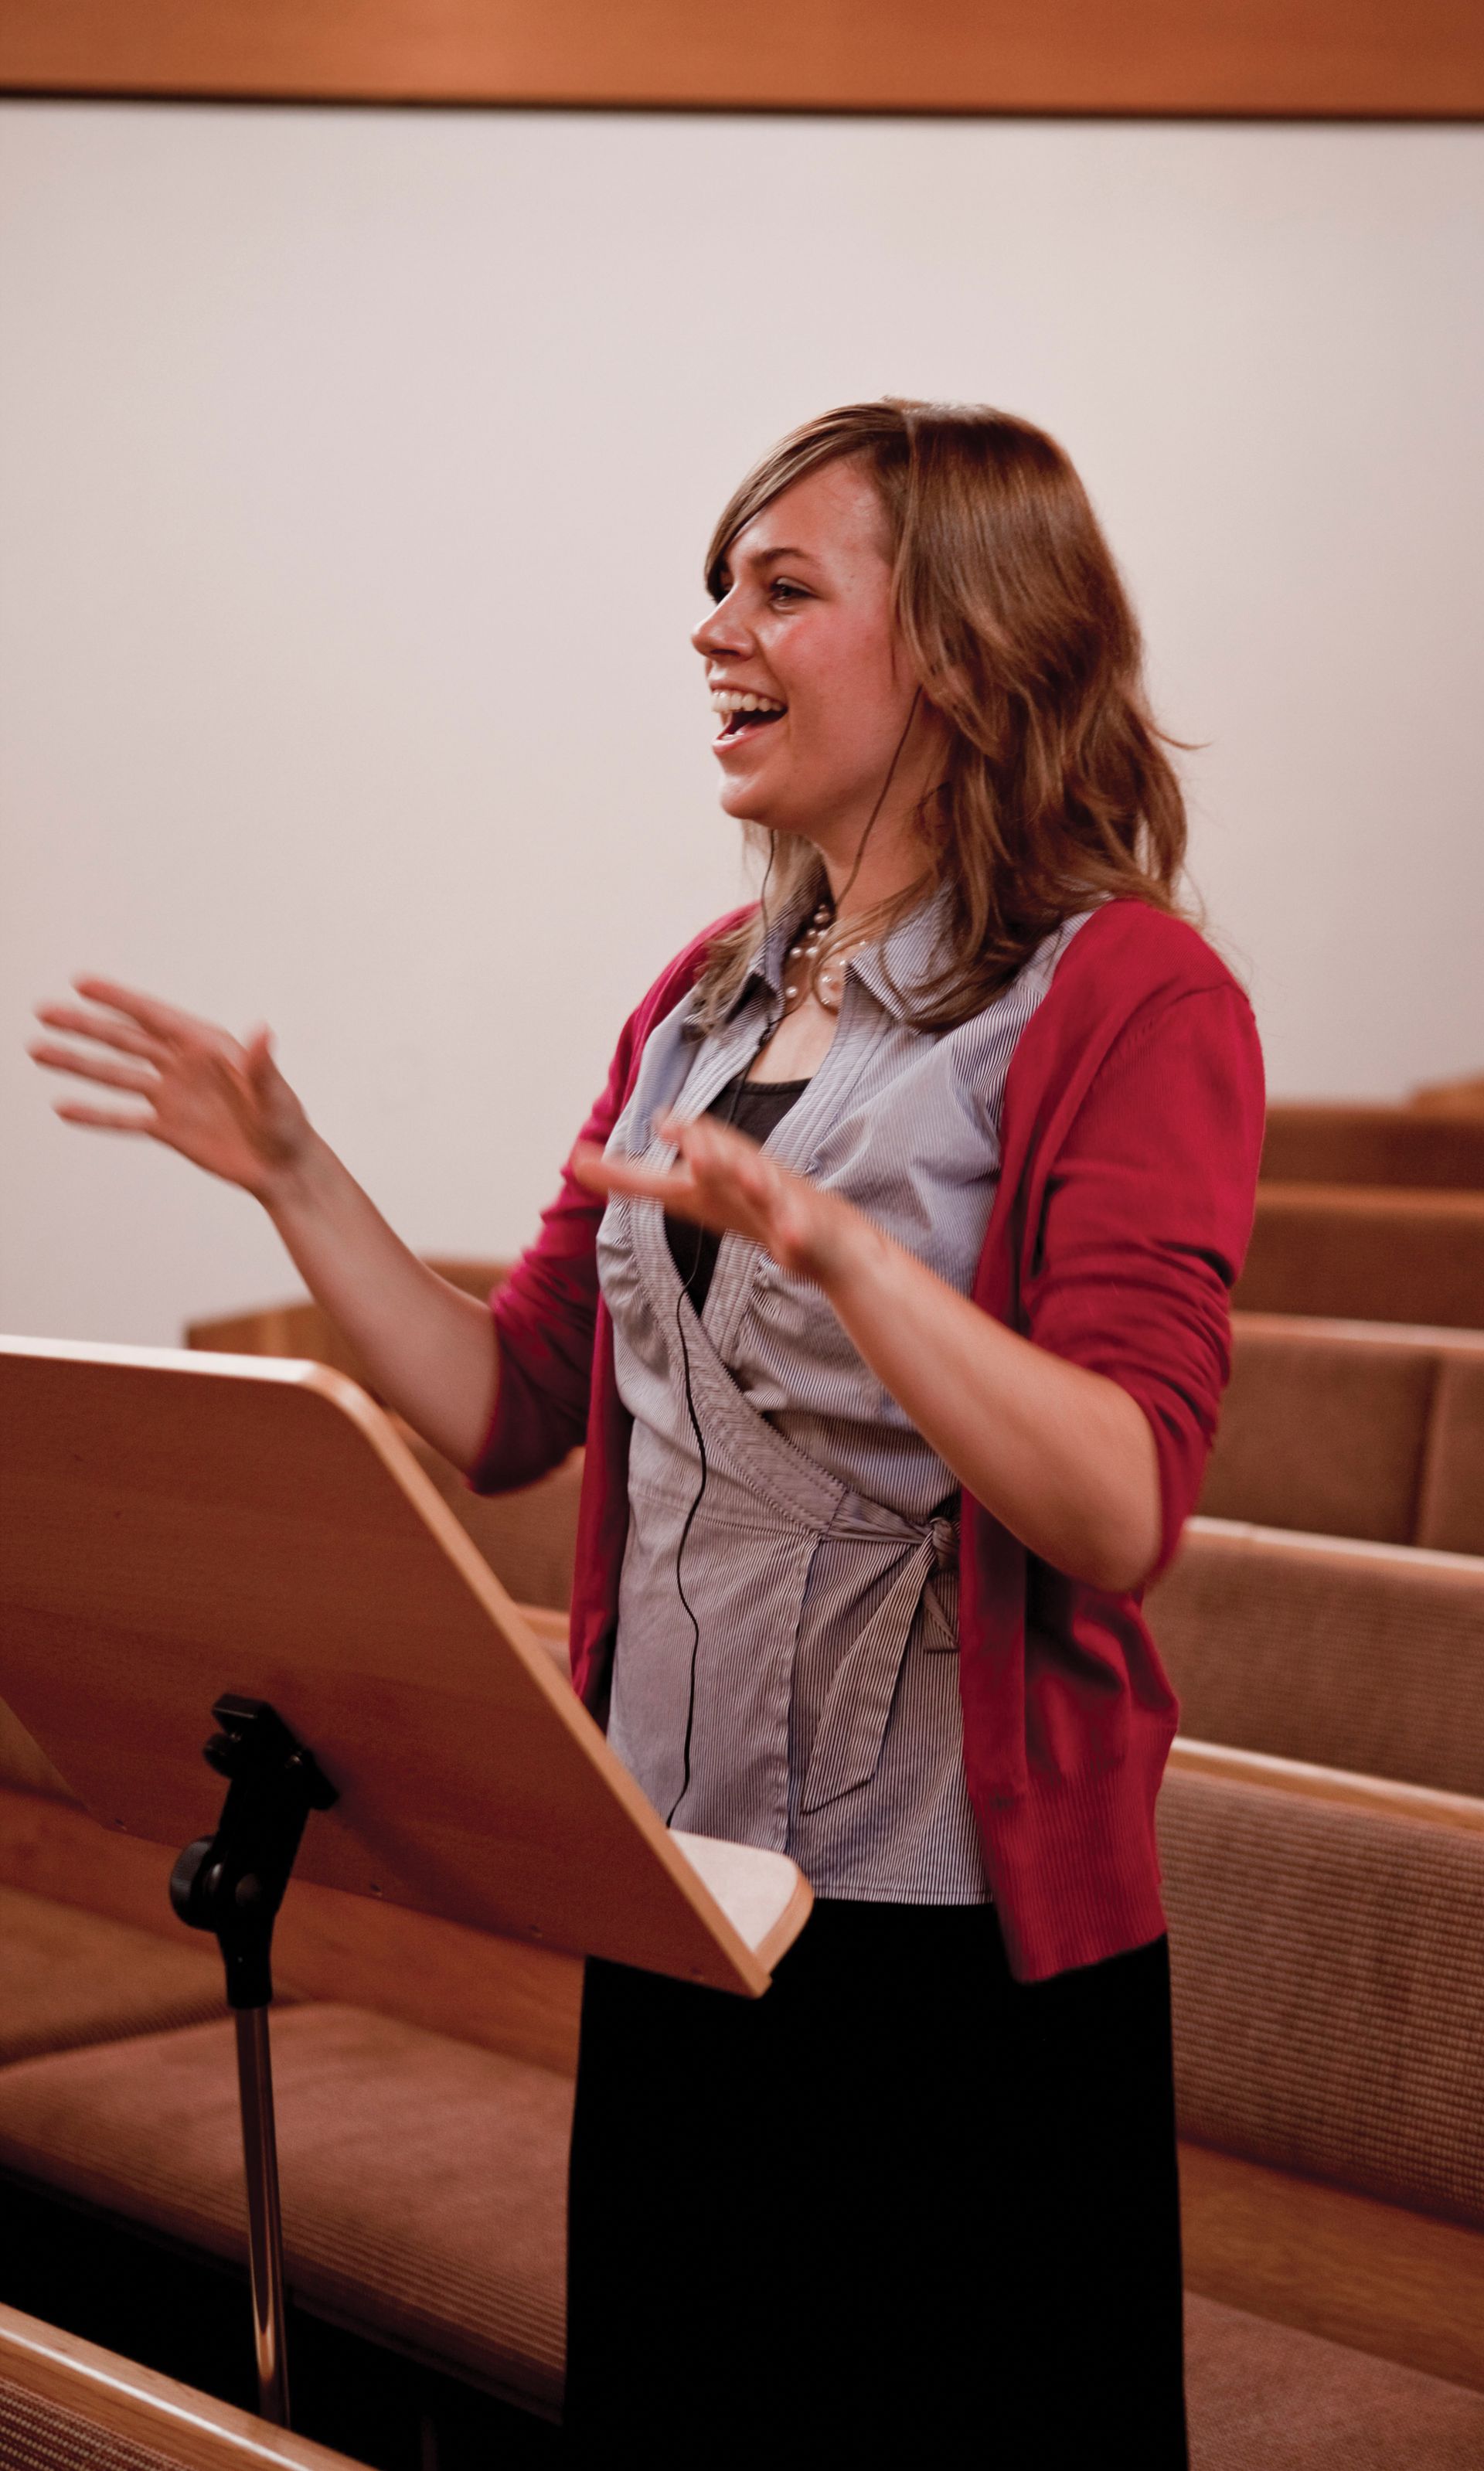 A young woman conducts a choir in song.